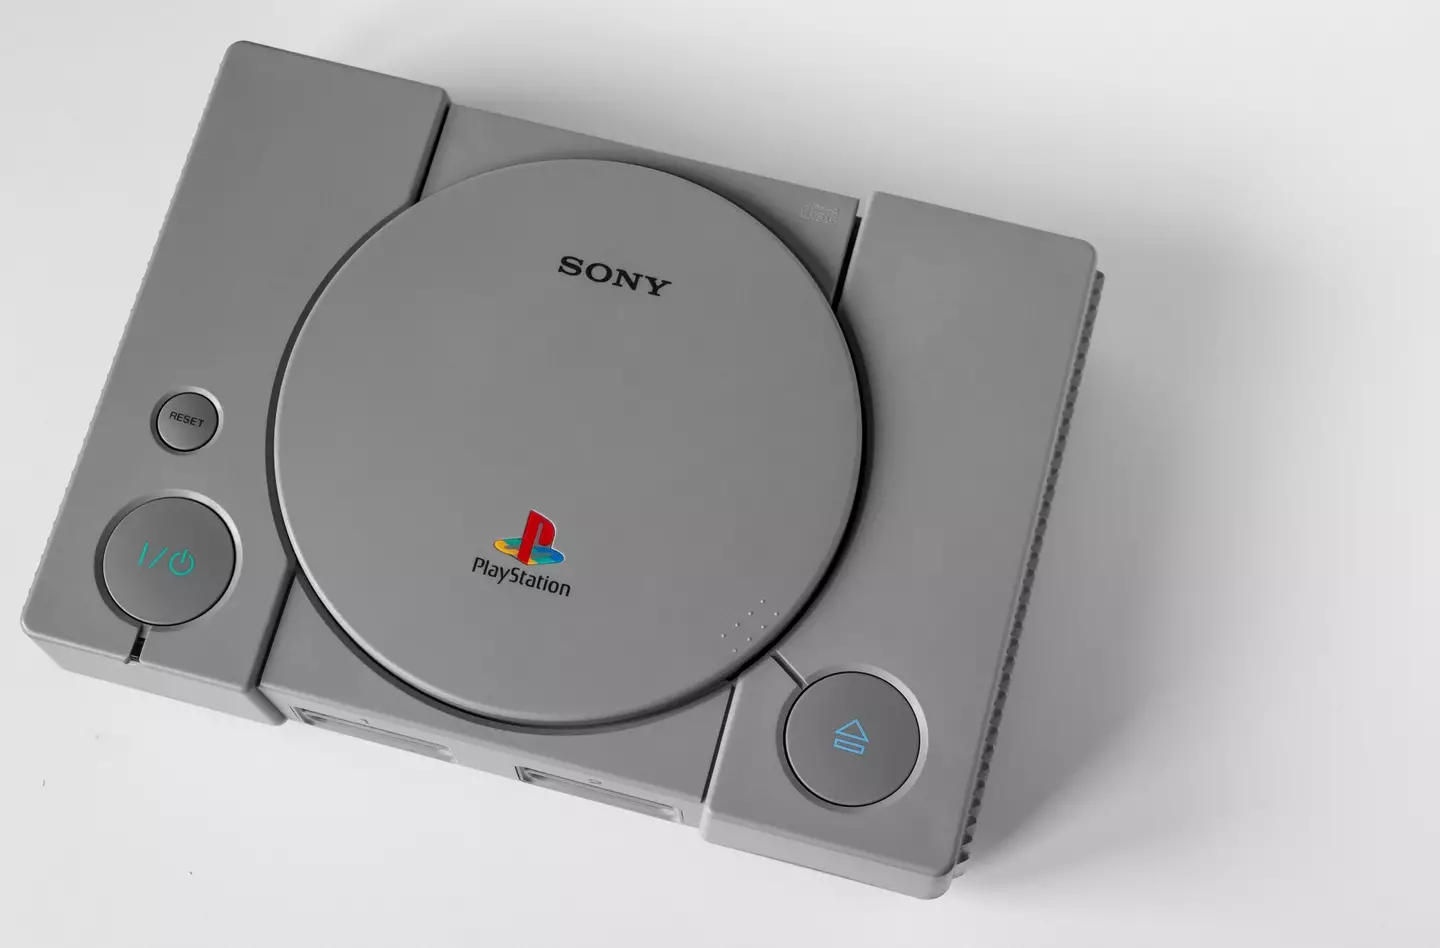 The PS1 was released in 1995.